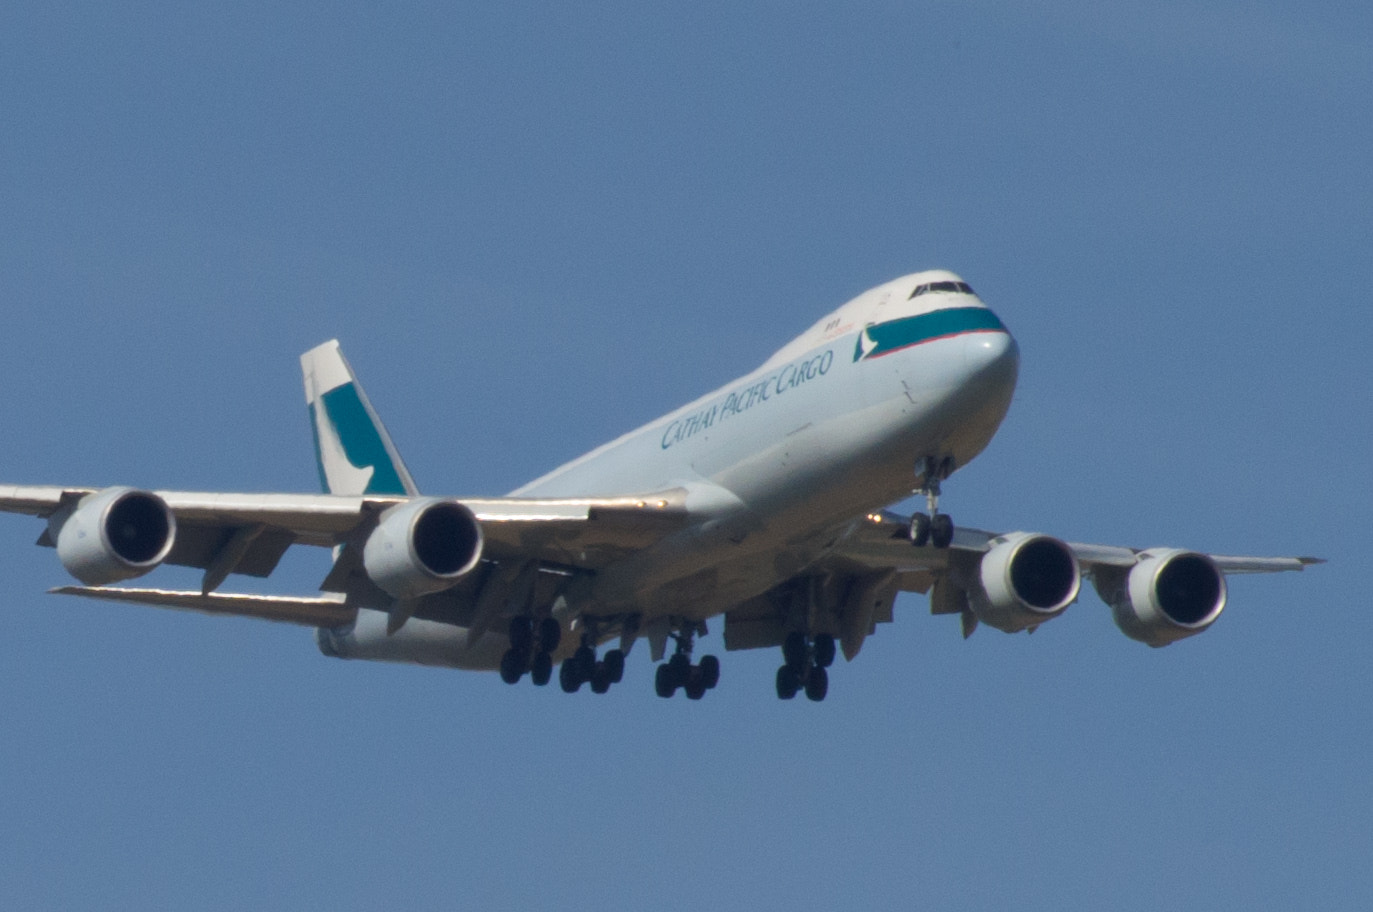 Pentax K-r sample photo. Boeing 747-8f cathay pacific photography